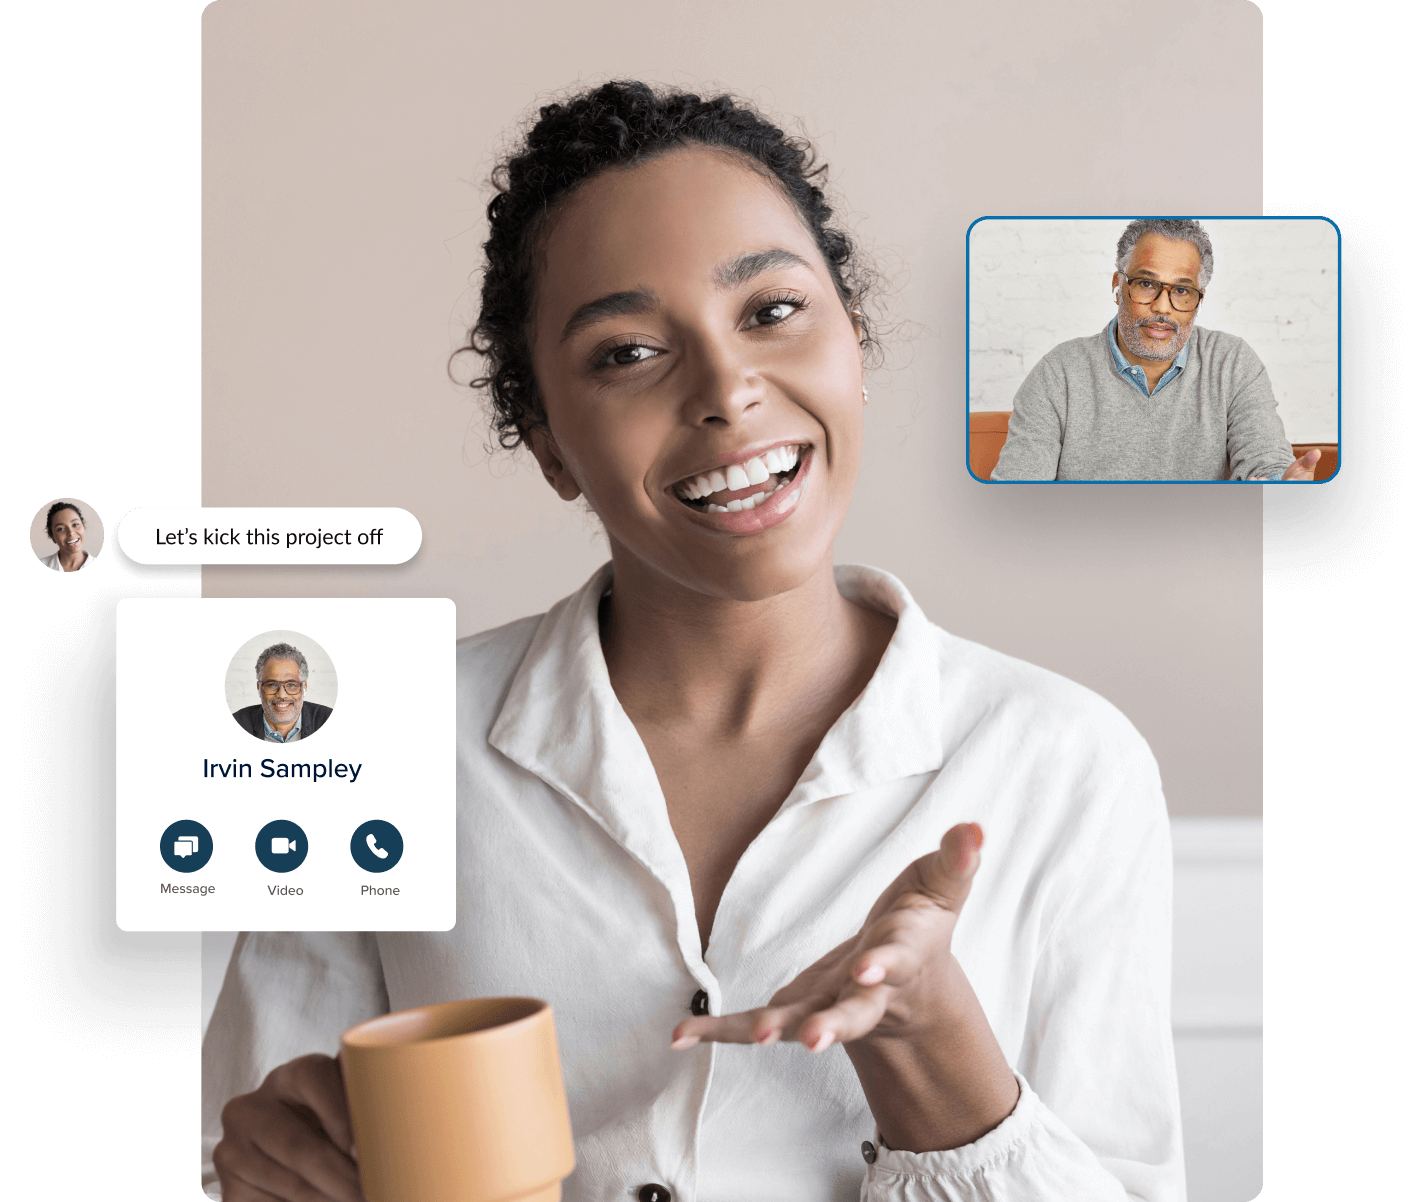 Employee speaking with her manager thru a video call made possible by VoIP